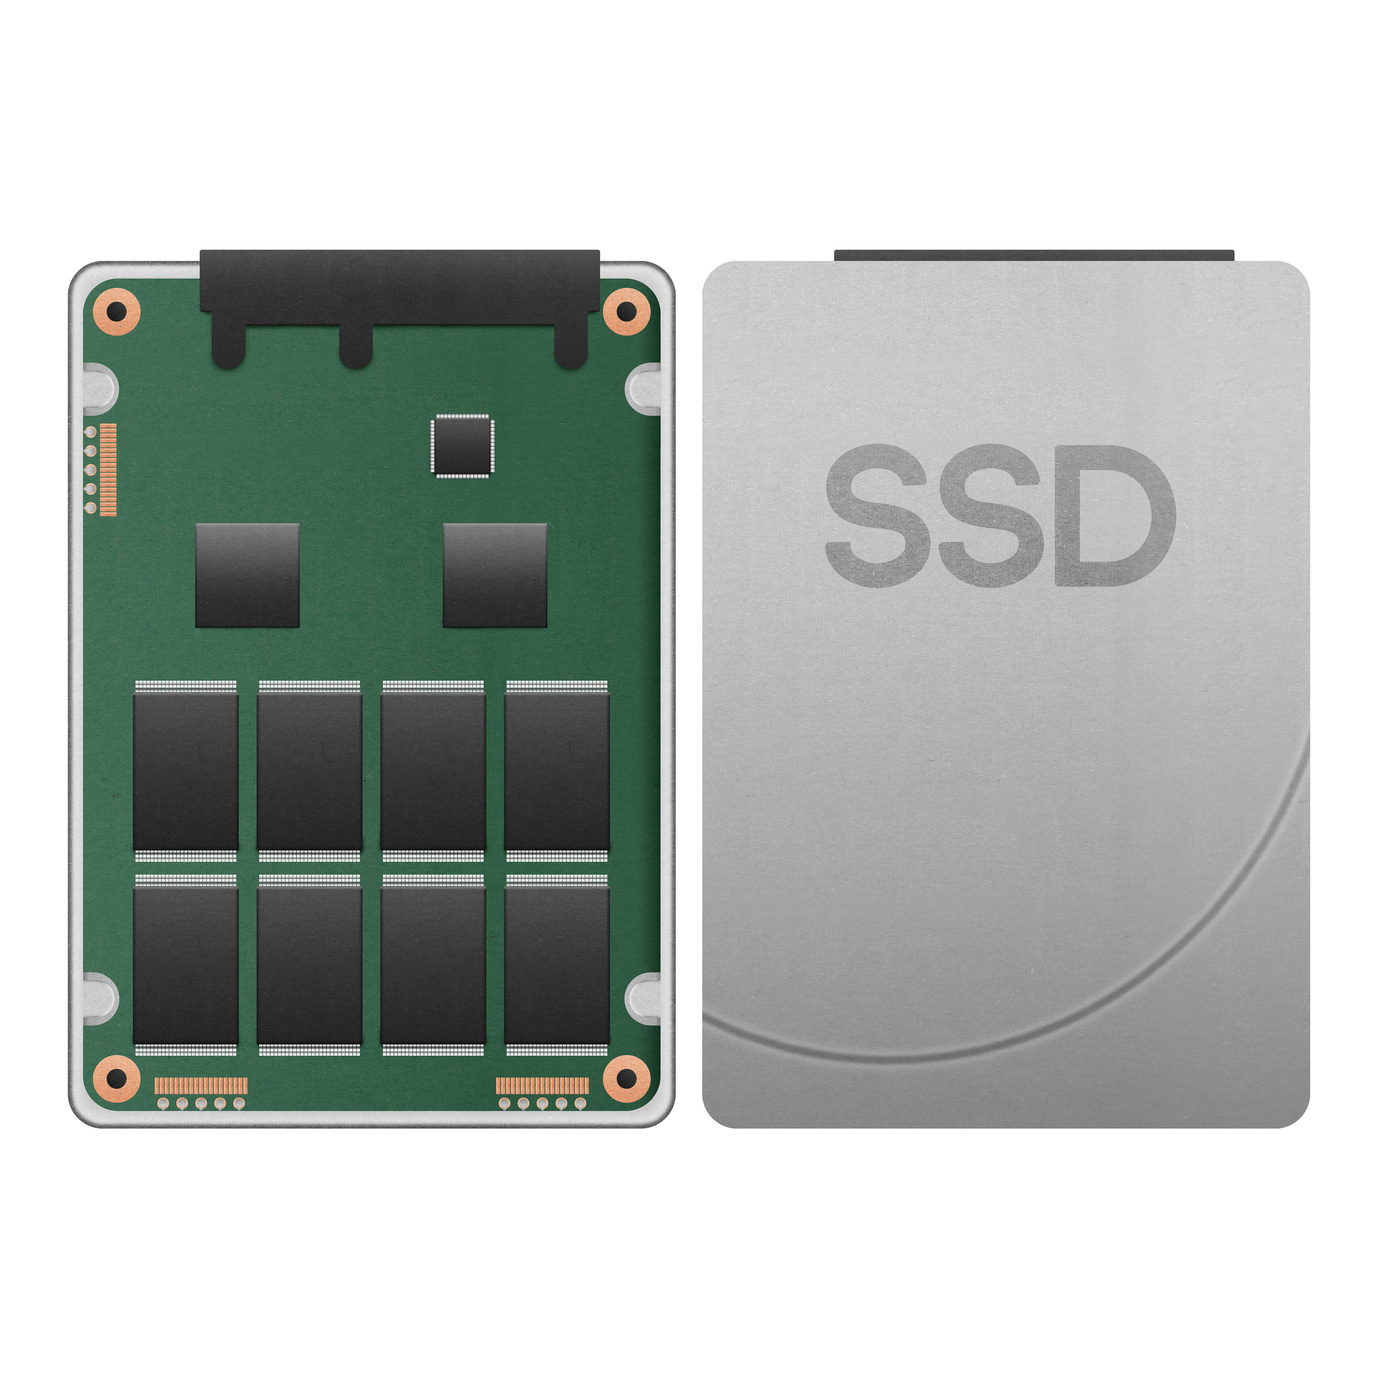 Wd5000p032 driver for mac